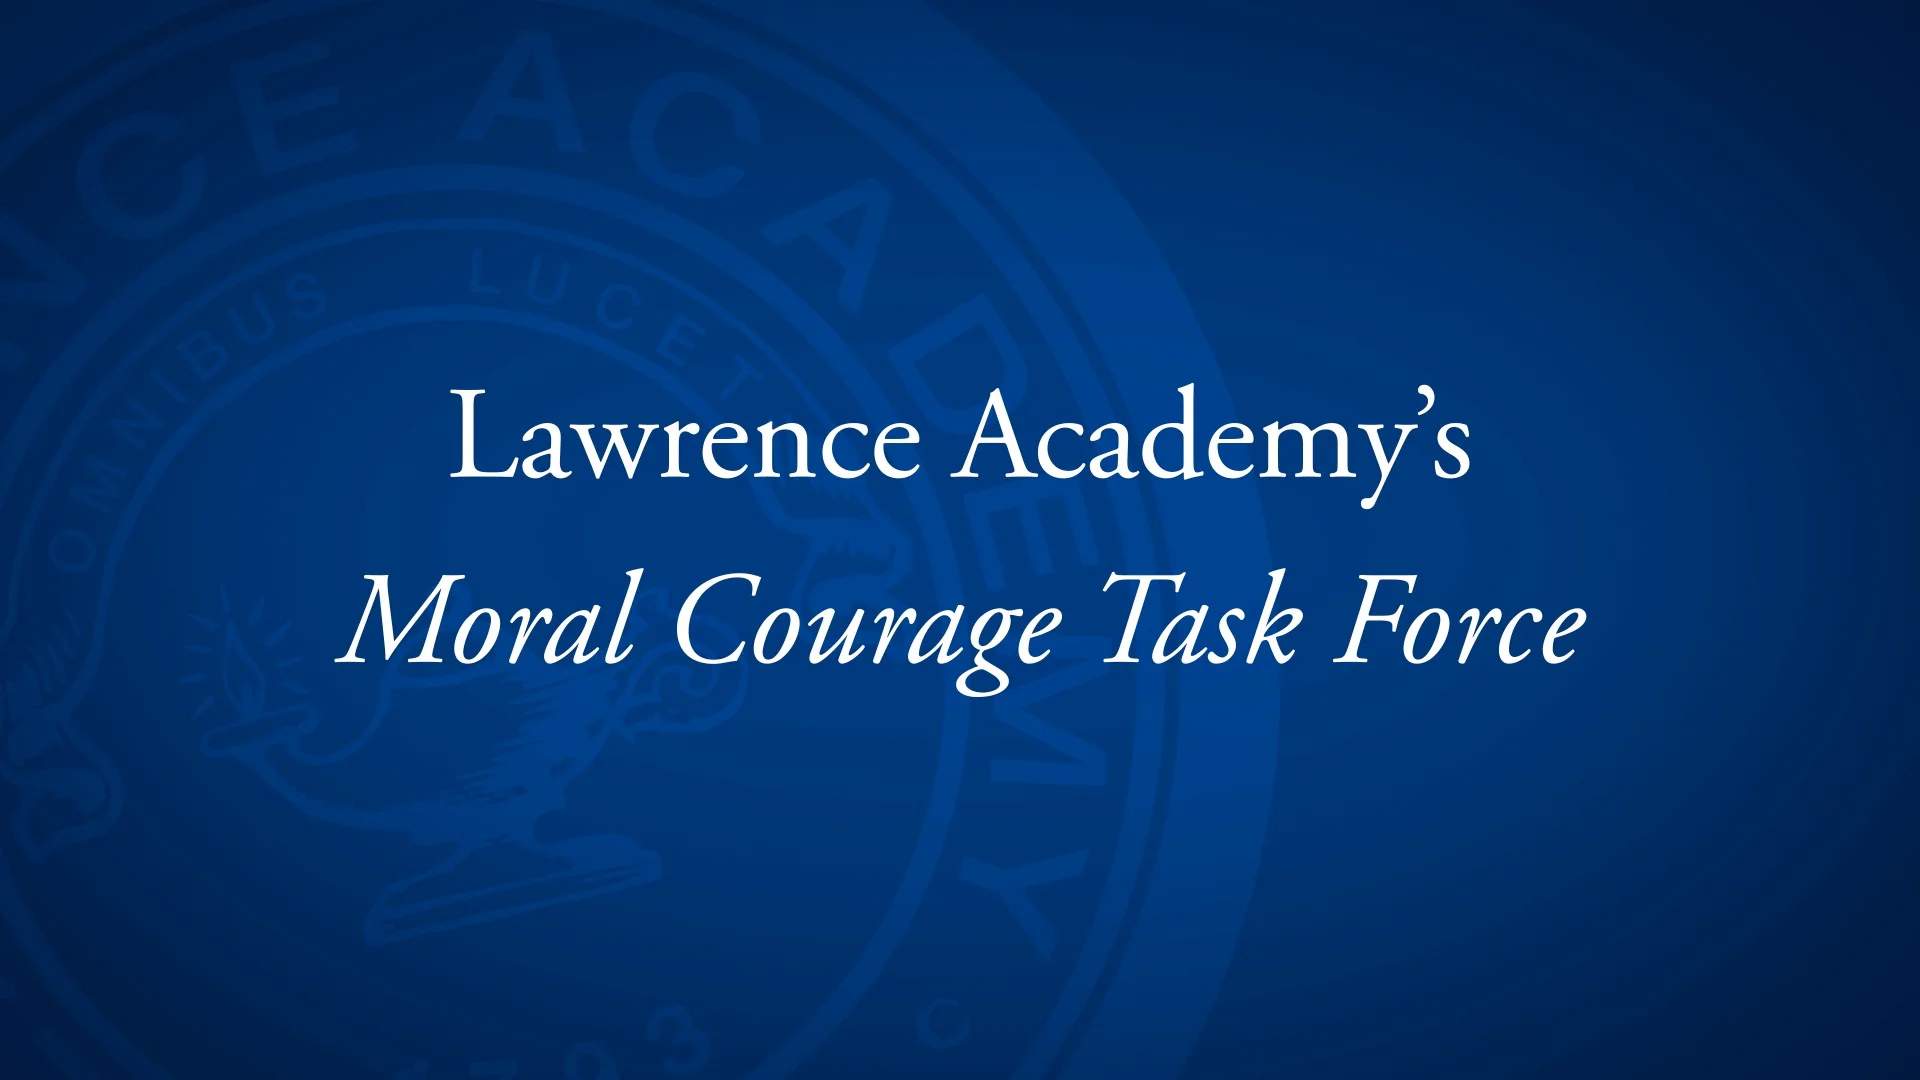 Moral Courage Task Force  Lawrence Academy on Vimeo